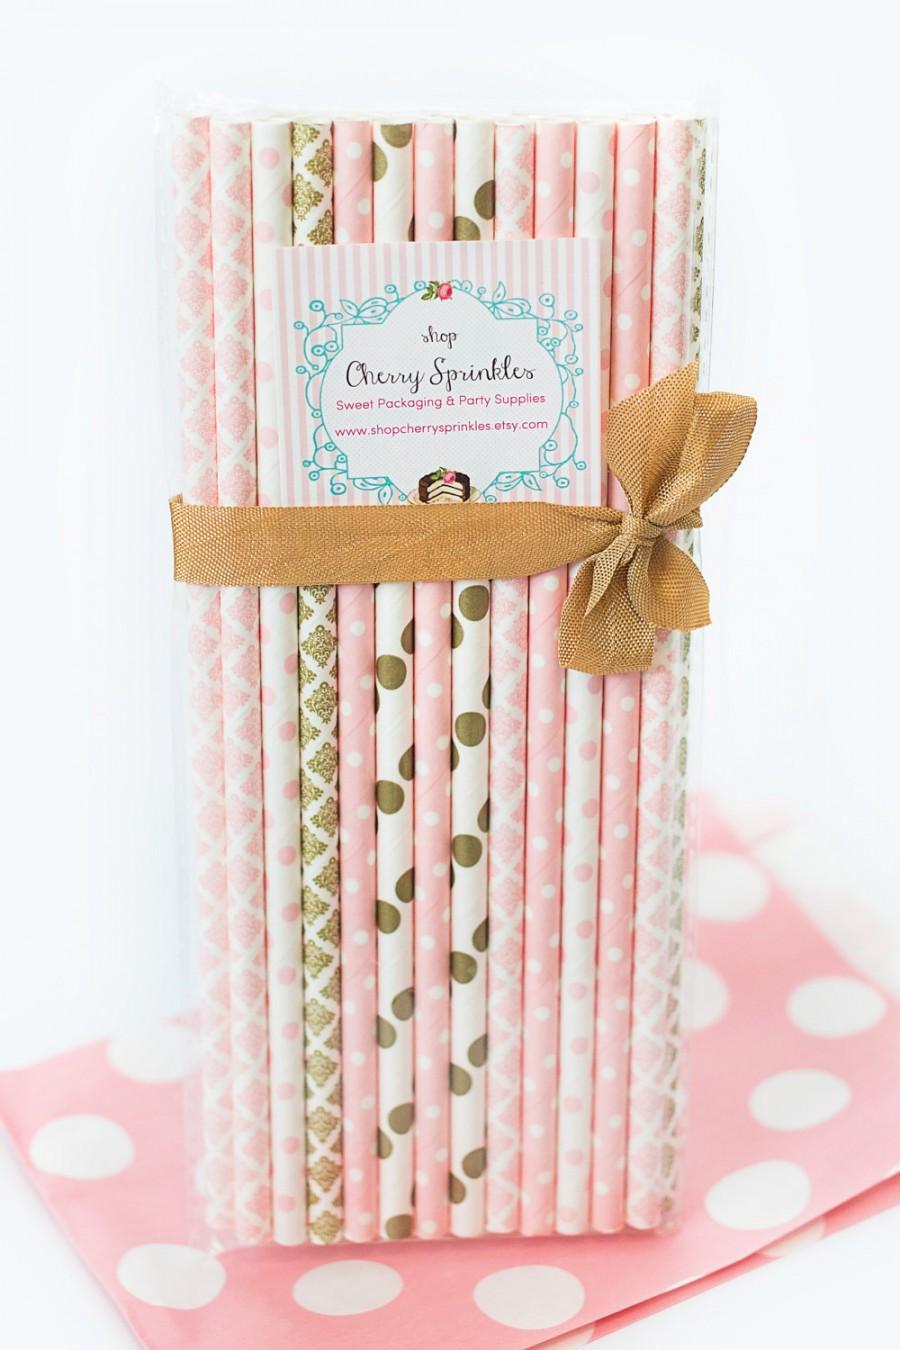 Wedding - PINK TUTUS -Party Supplies -Pinks and Golds  PINK Paper Straws for Baby Girl Showers, Weddings or Bridal Showers Gold Straws